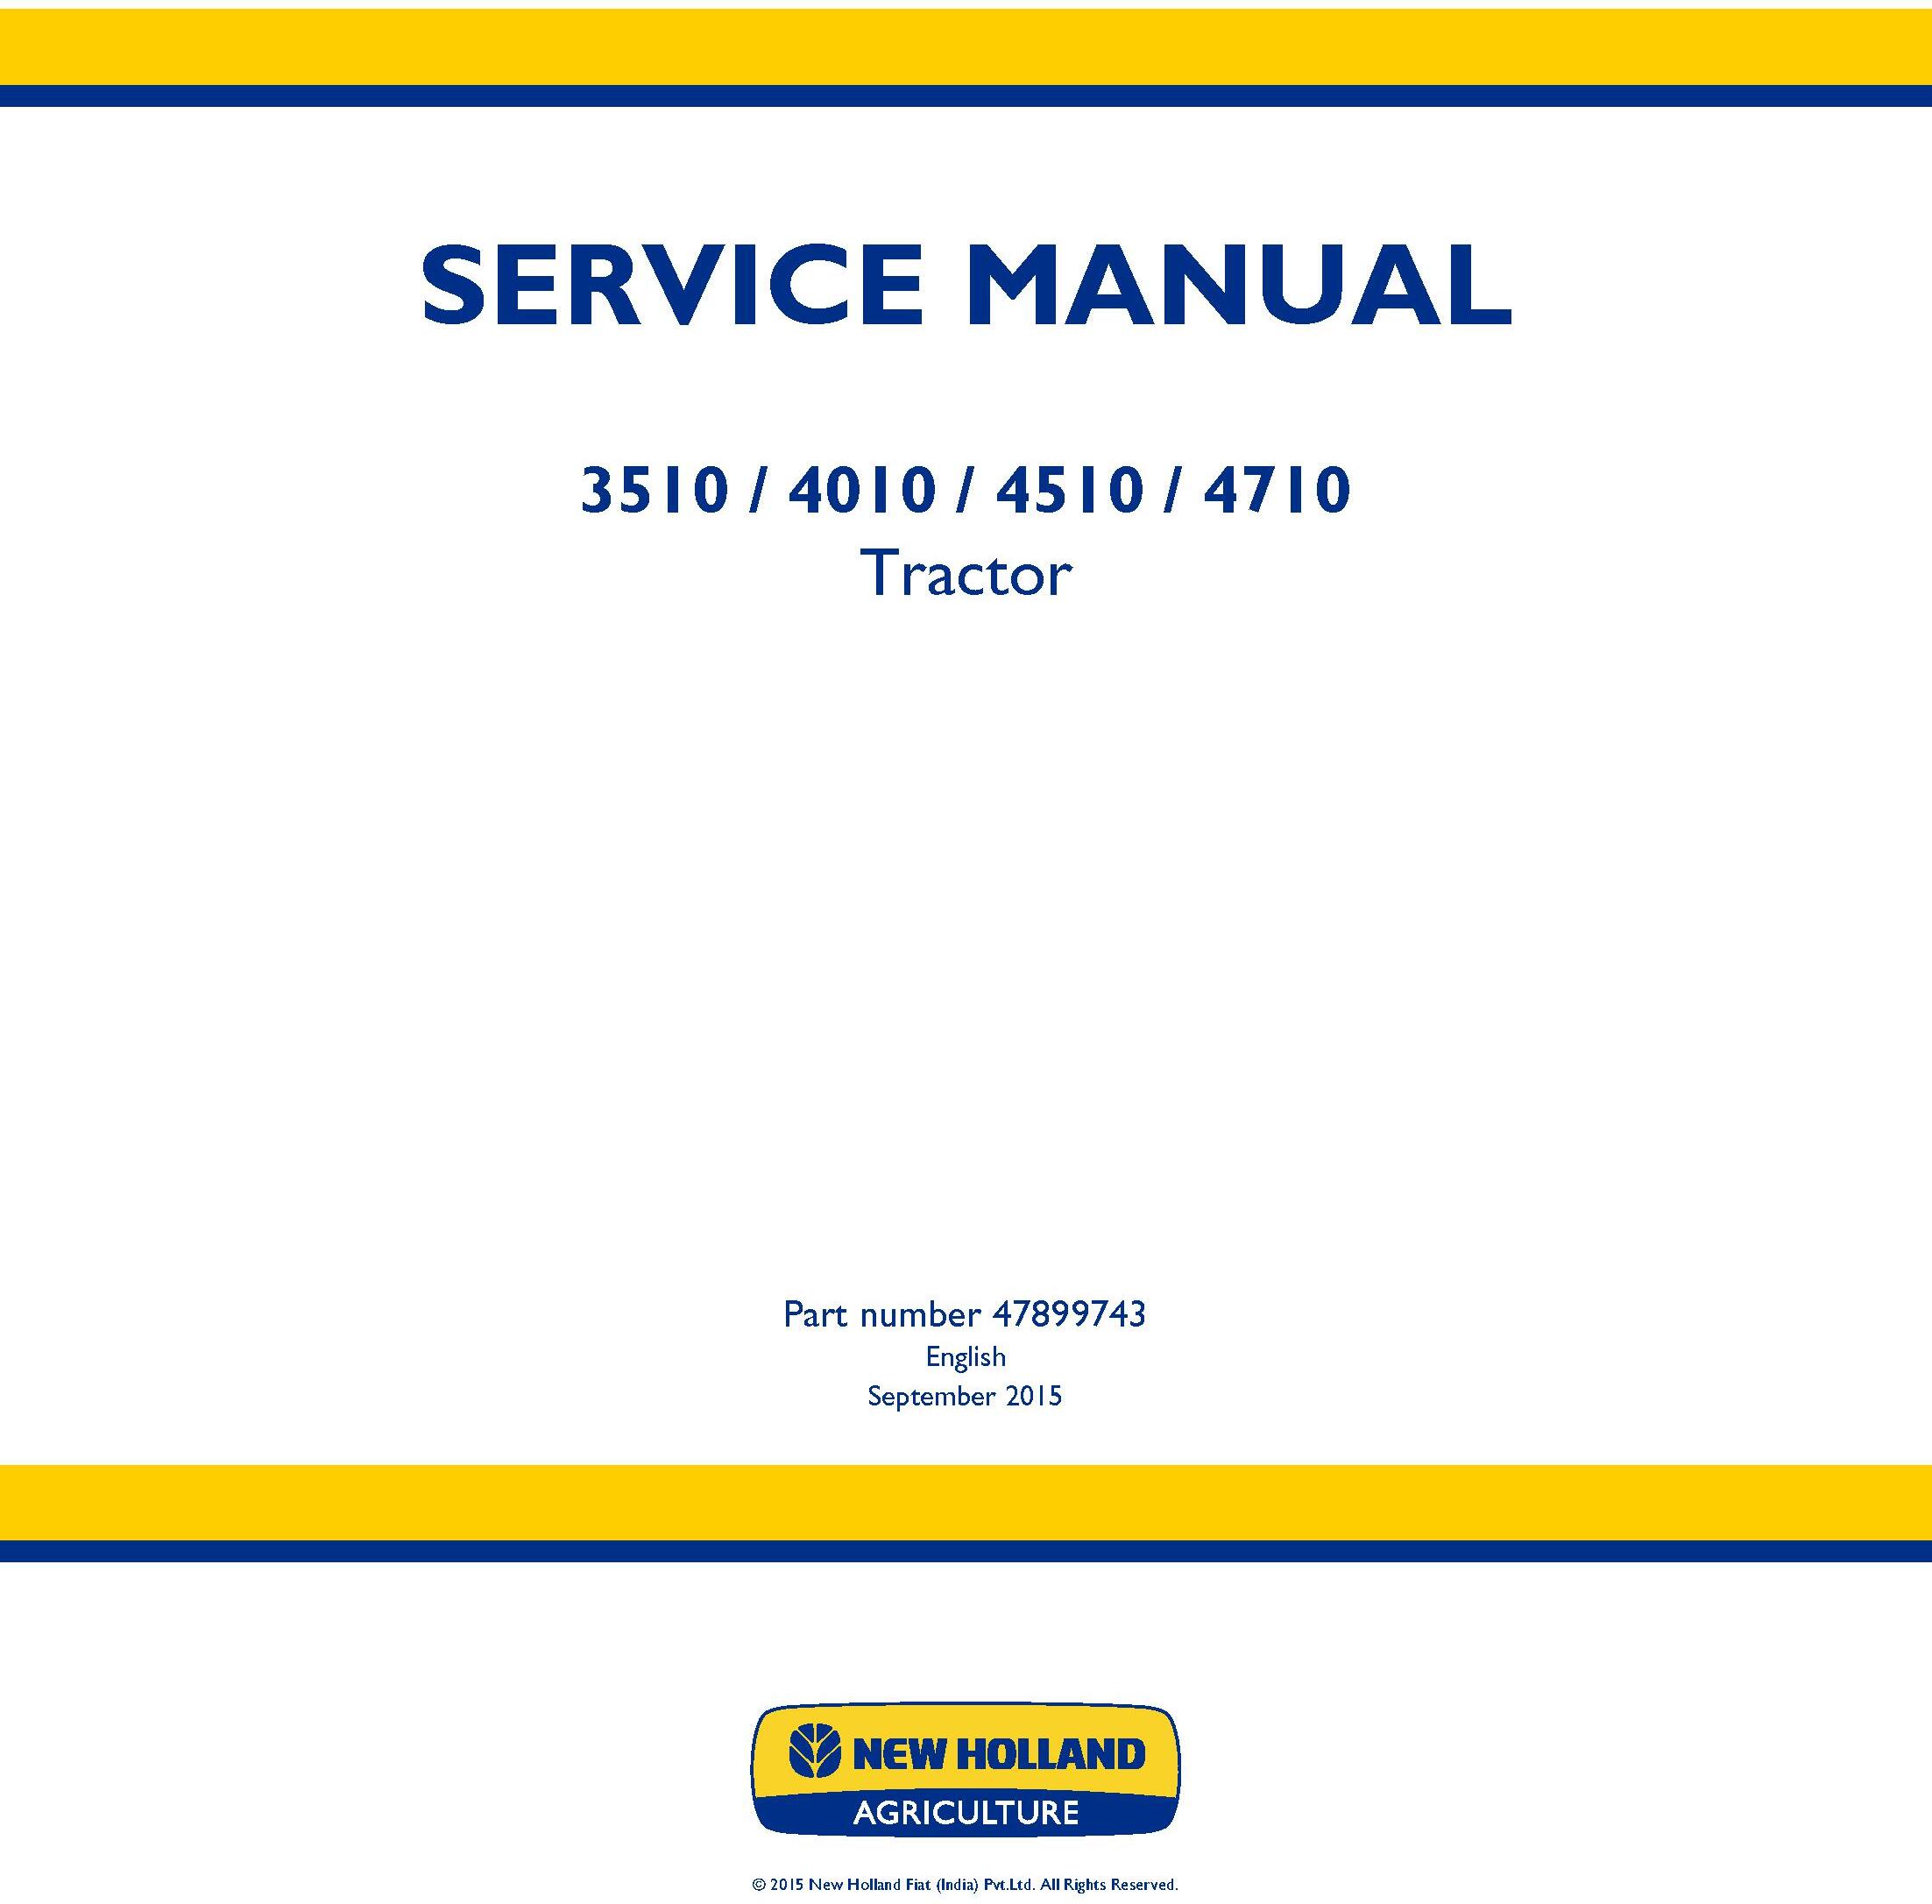 New Holland 3510, 4010, 4510, 4710 Tractor Service Manual - 19448